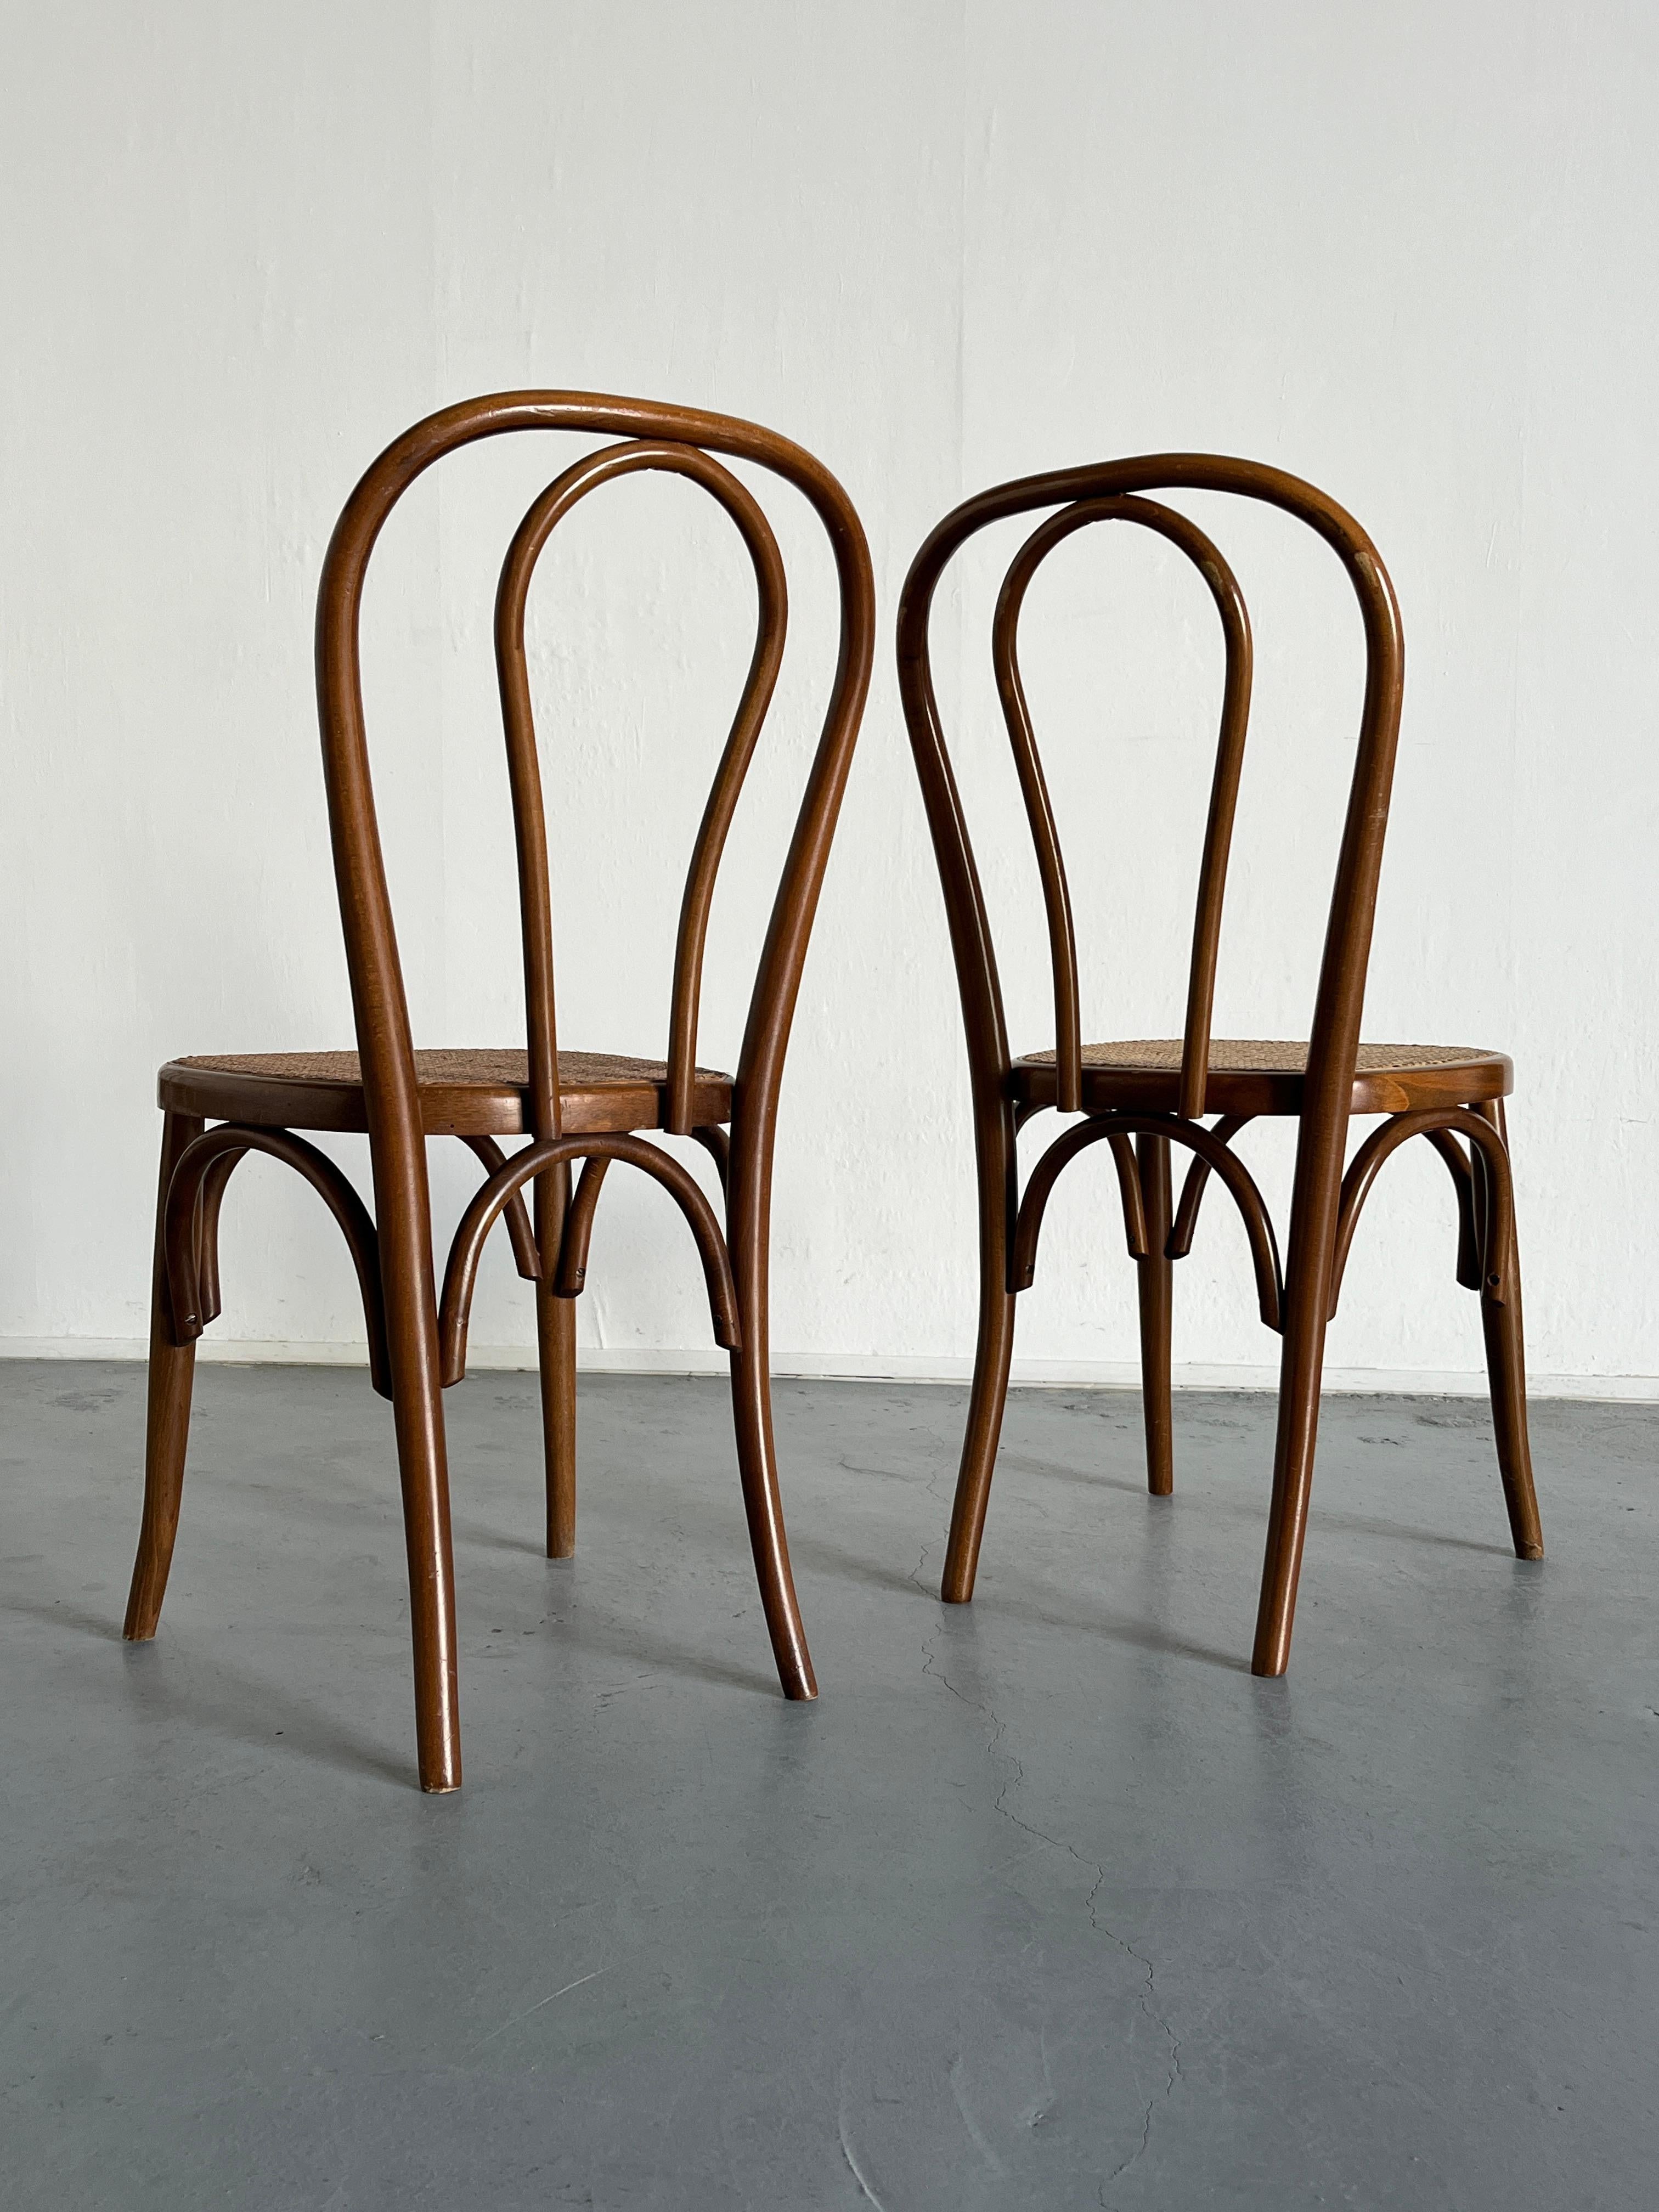 Set of 4 Vintage Thonet Bentwood Style Chairs, European Bistro Chairs, 1950s For Sale 1